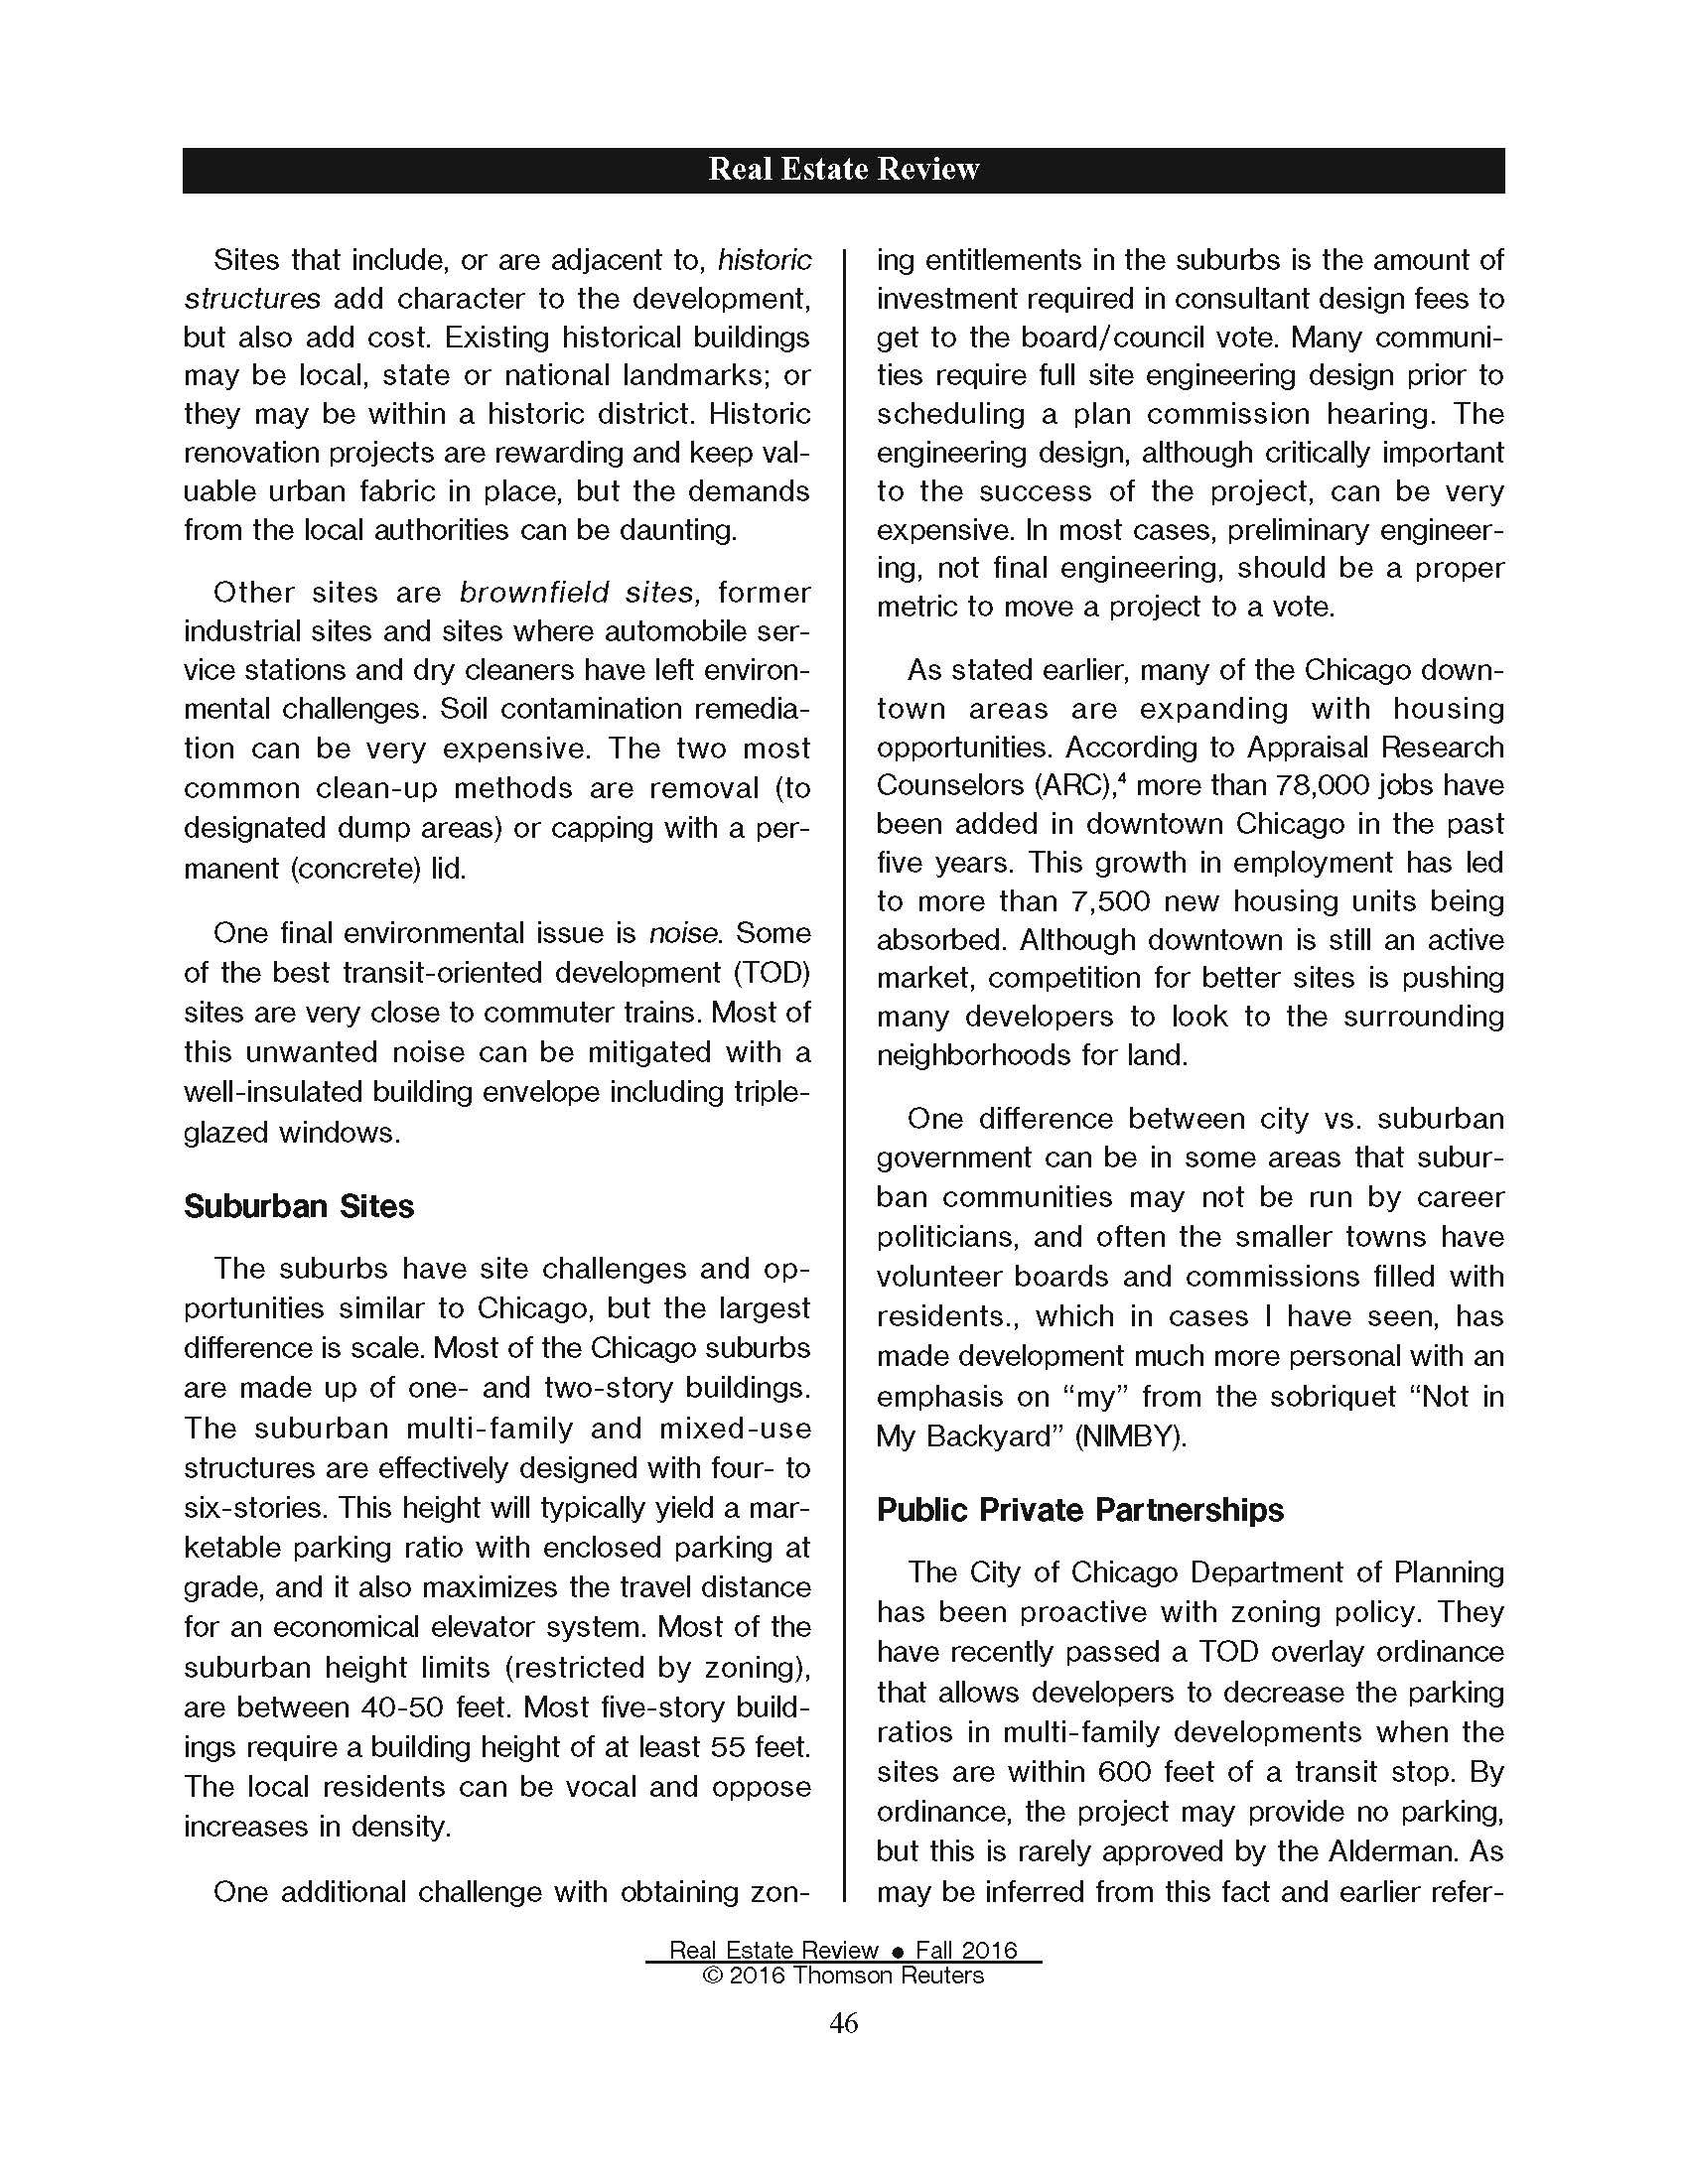 Real Estate Review (Building Mixed-Use Developments Process and Progress in Urban Design) 0916_Page_12